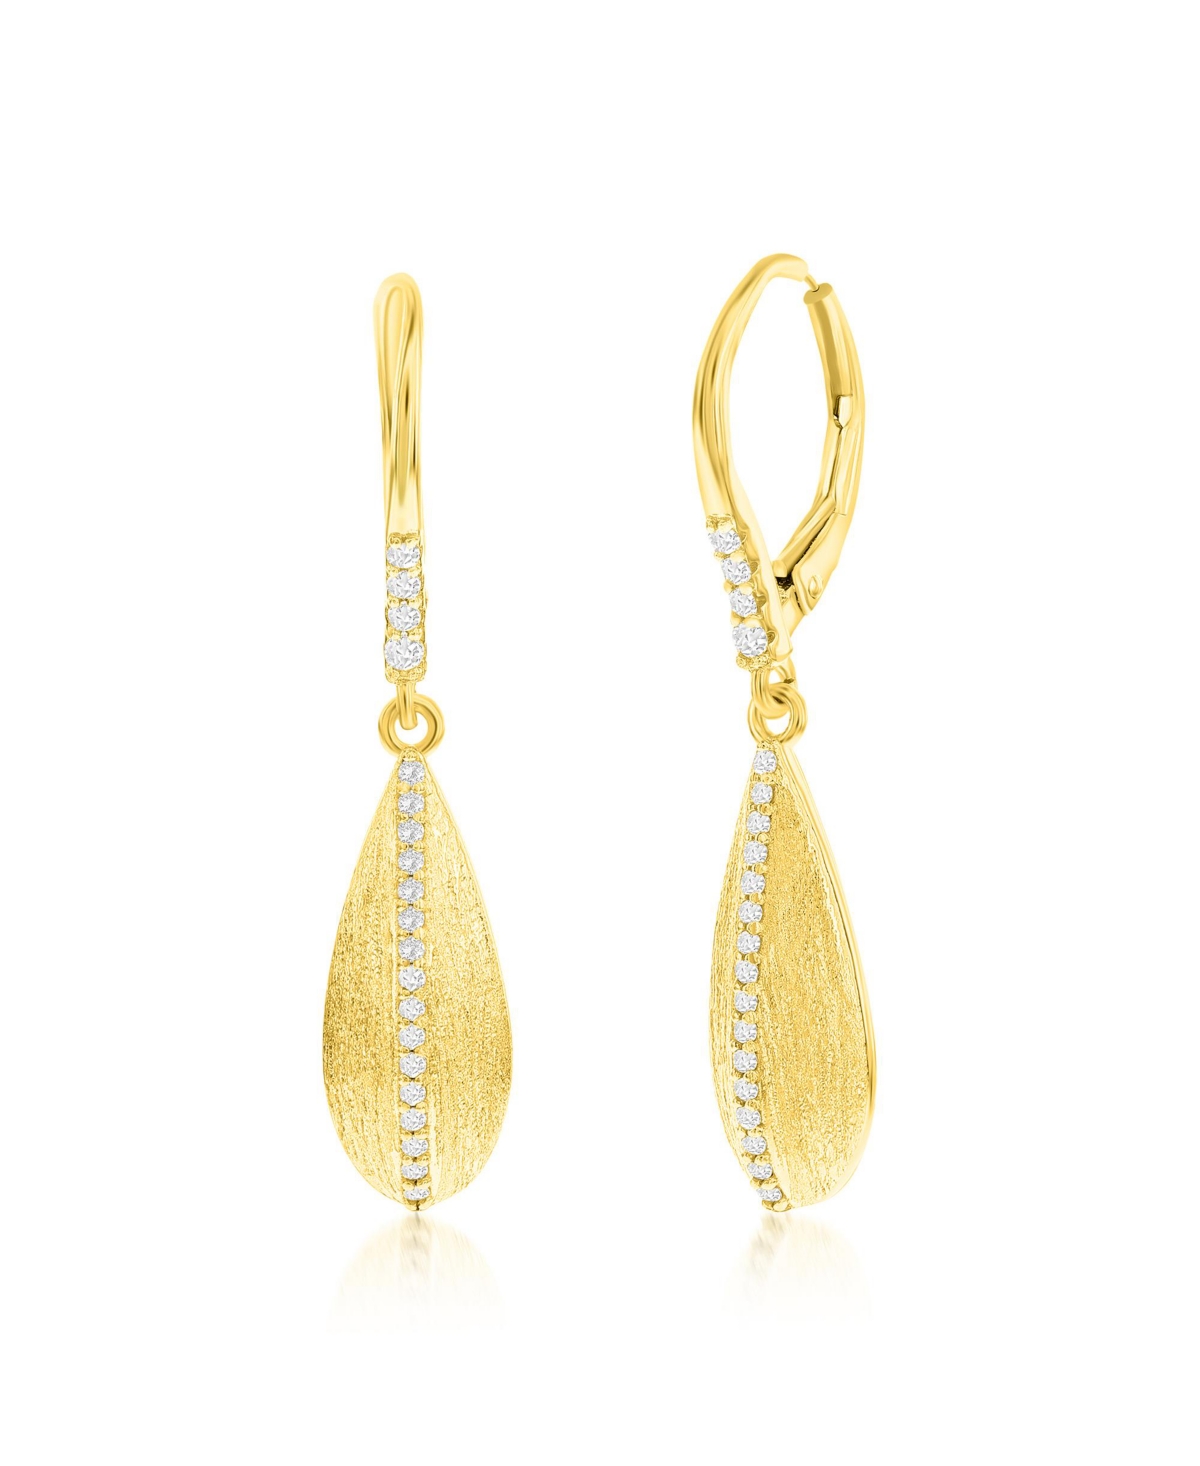 Gold Plated Over Sterling Silver Long Pear-Shaped Brushed Cz Earrings - Gold